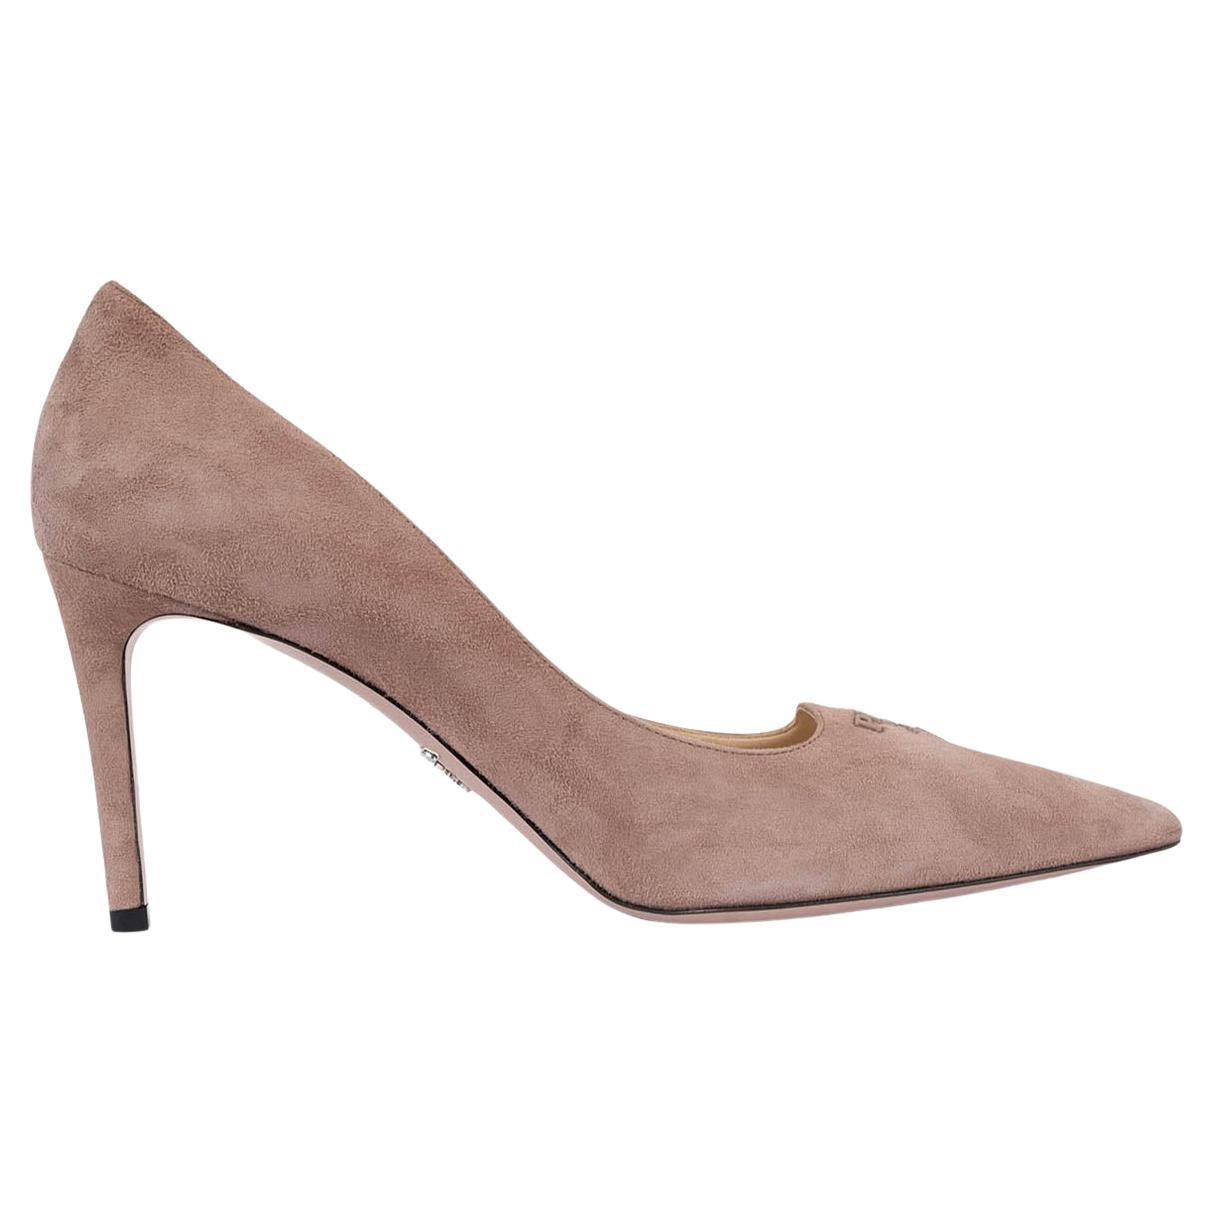 PRADA dusty rose suede LOGO POINTED TOE Pumps Shoes 39.5 For Sale